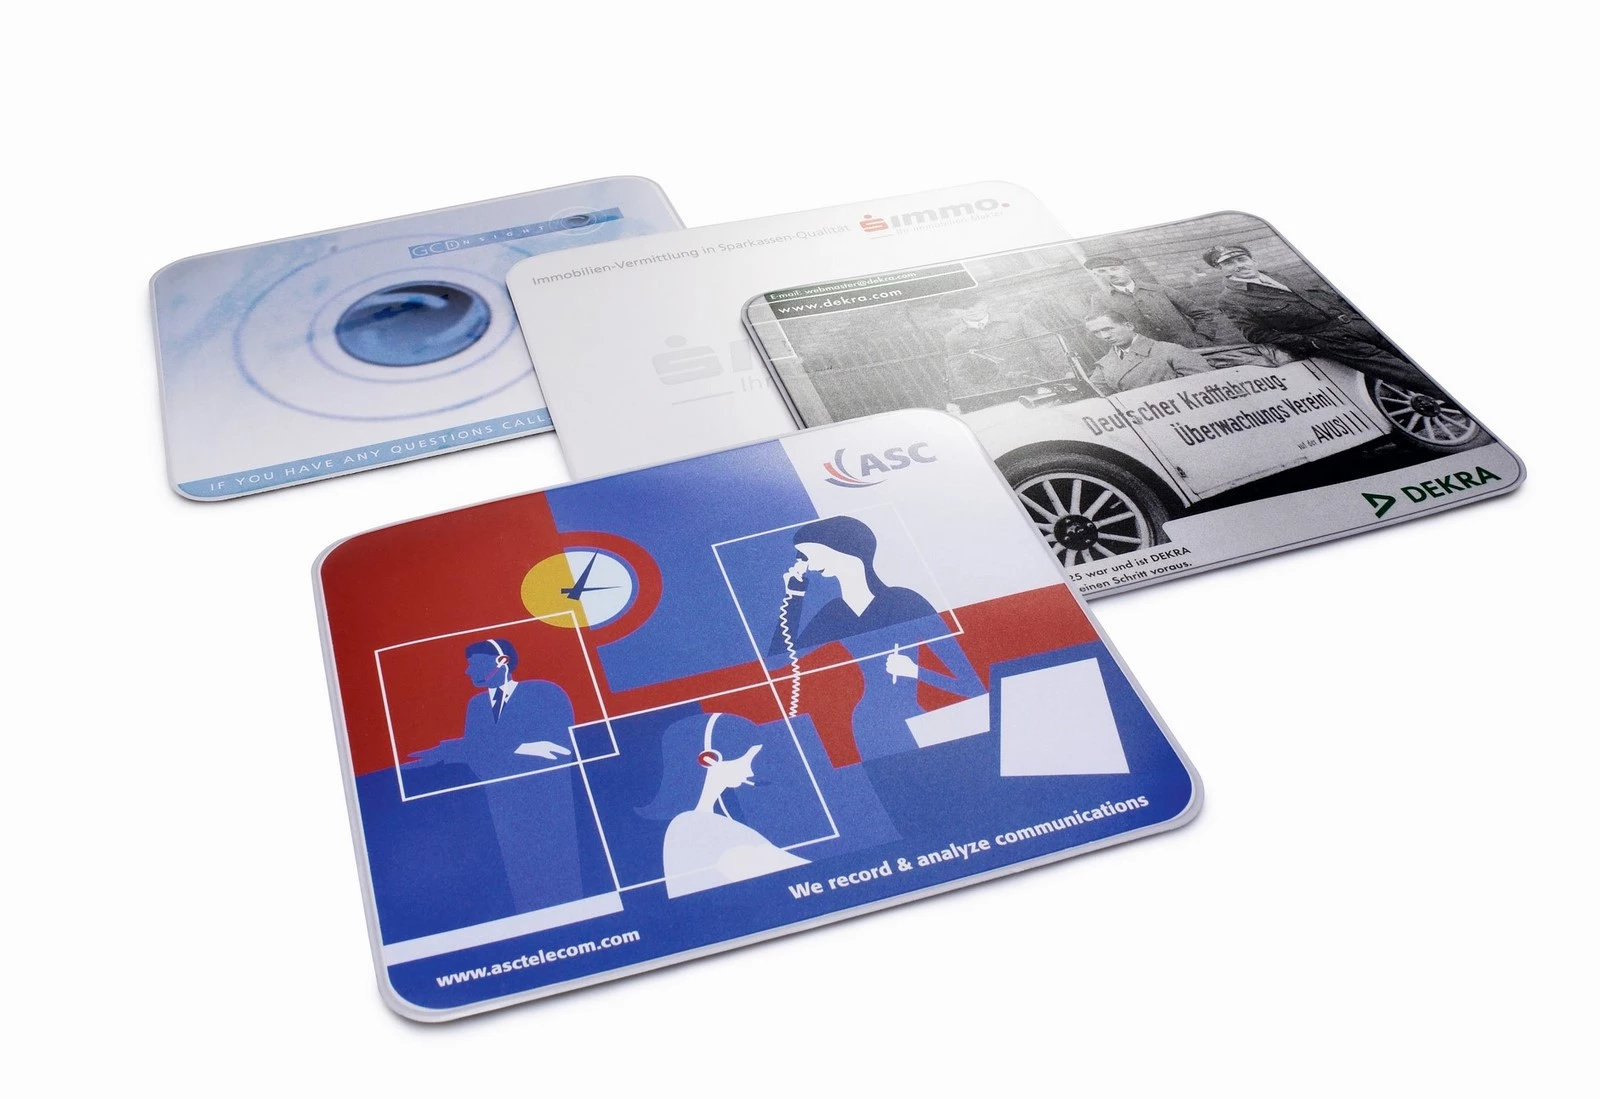 Mousepads Auswahl mit Druck / Mousepads selection with print